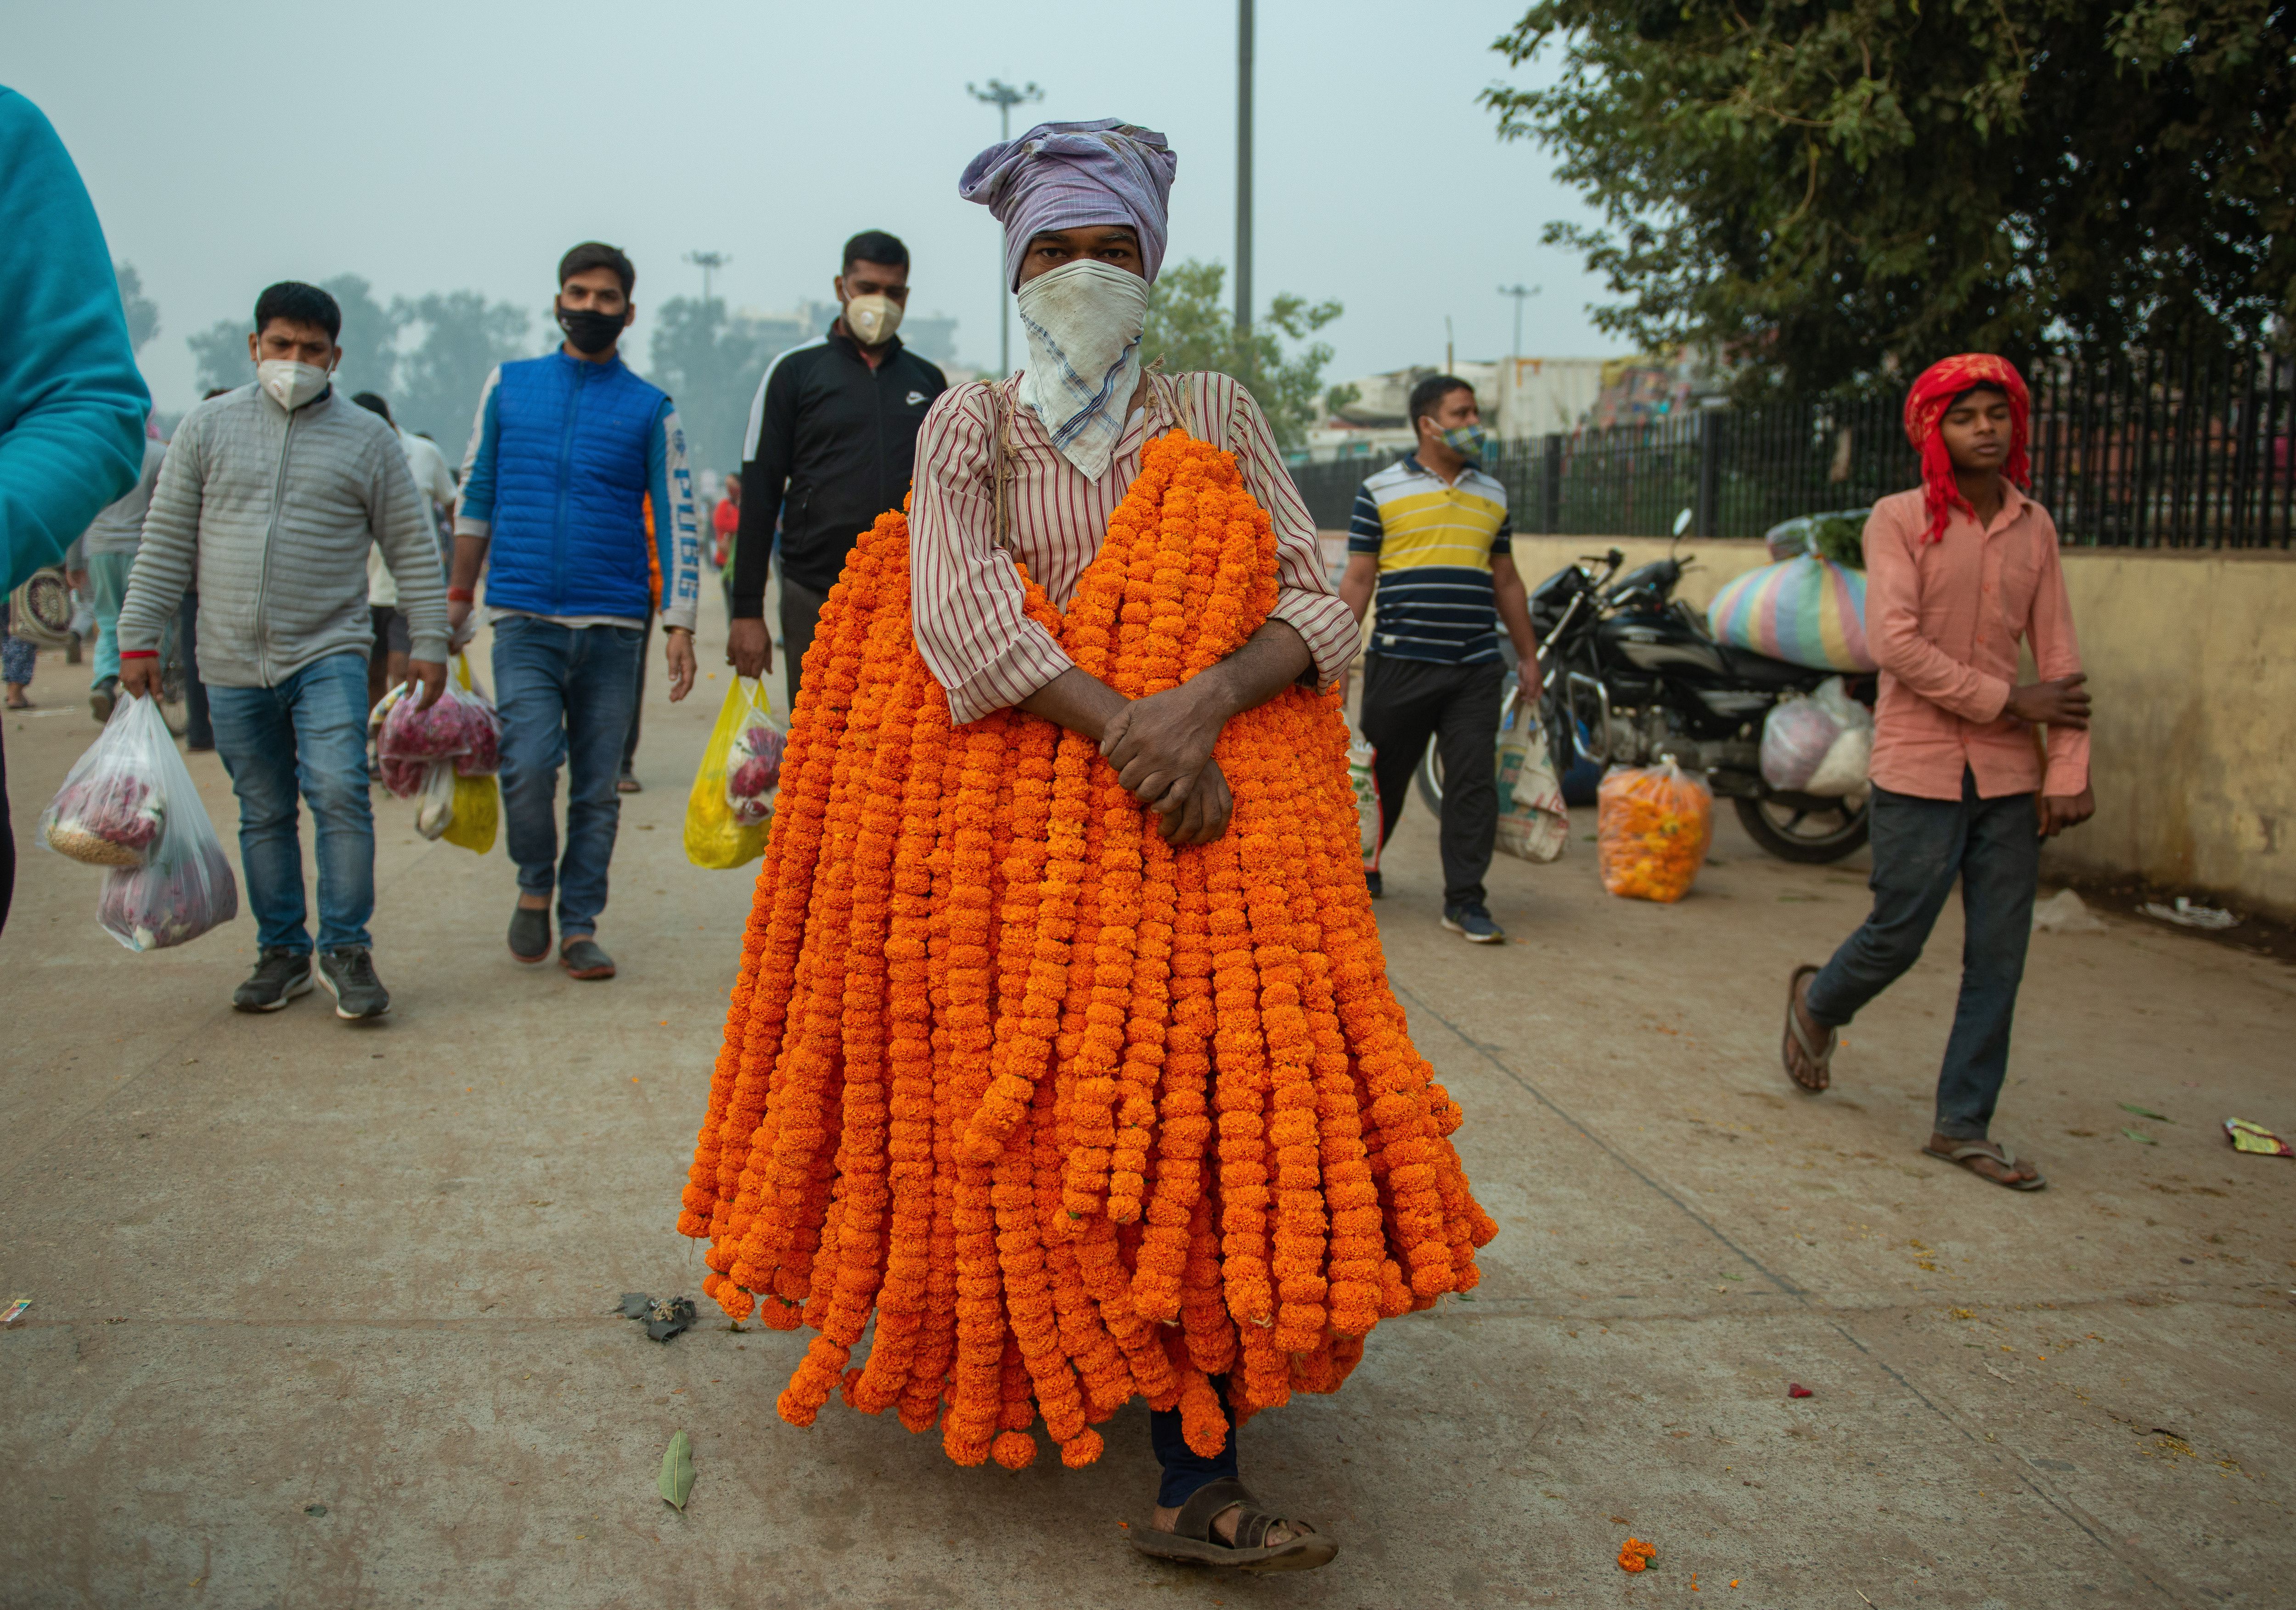 A man is seen carrying marigold flower garlands for sale for Diwali in the flower market in New Delhi, India